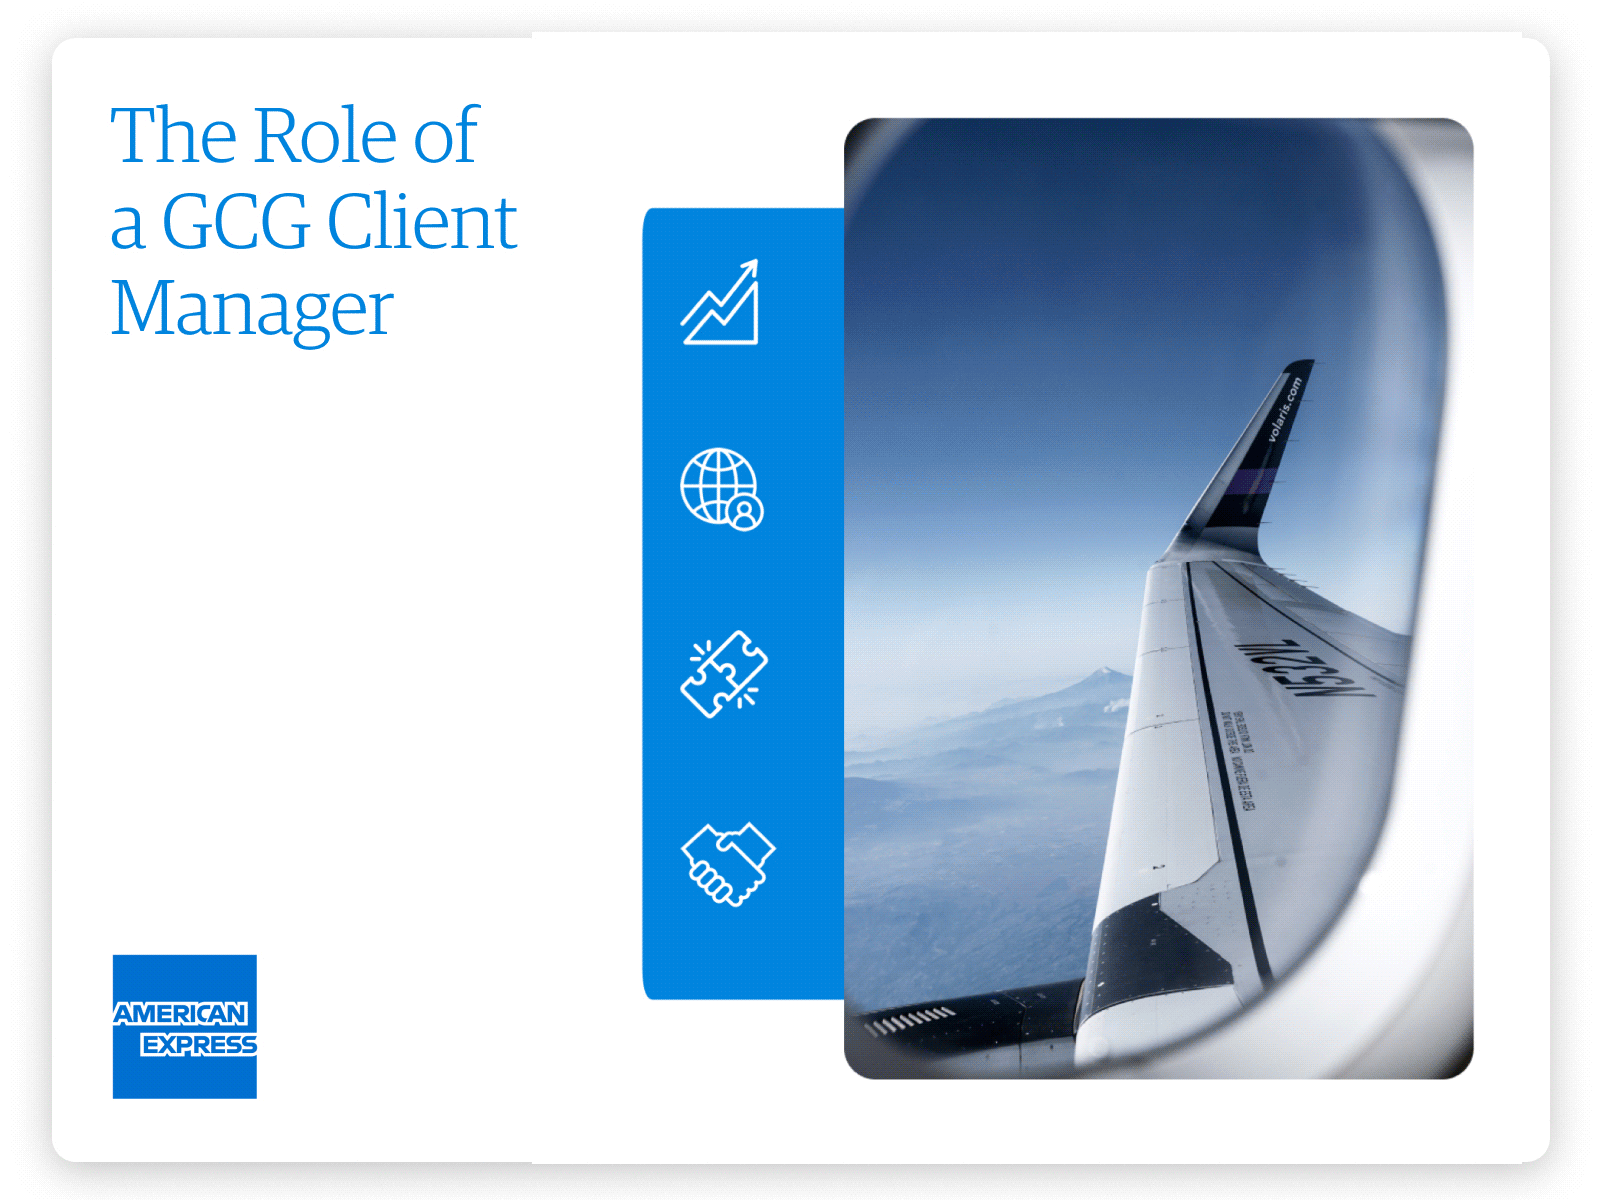 AMEX Global Client Group